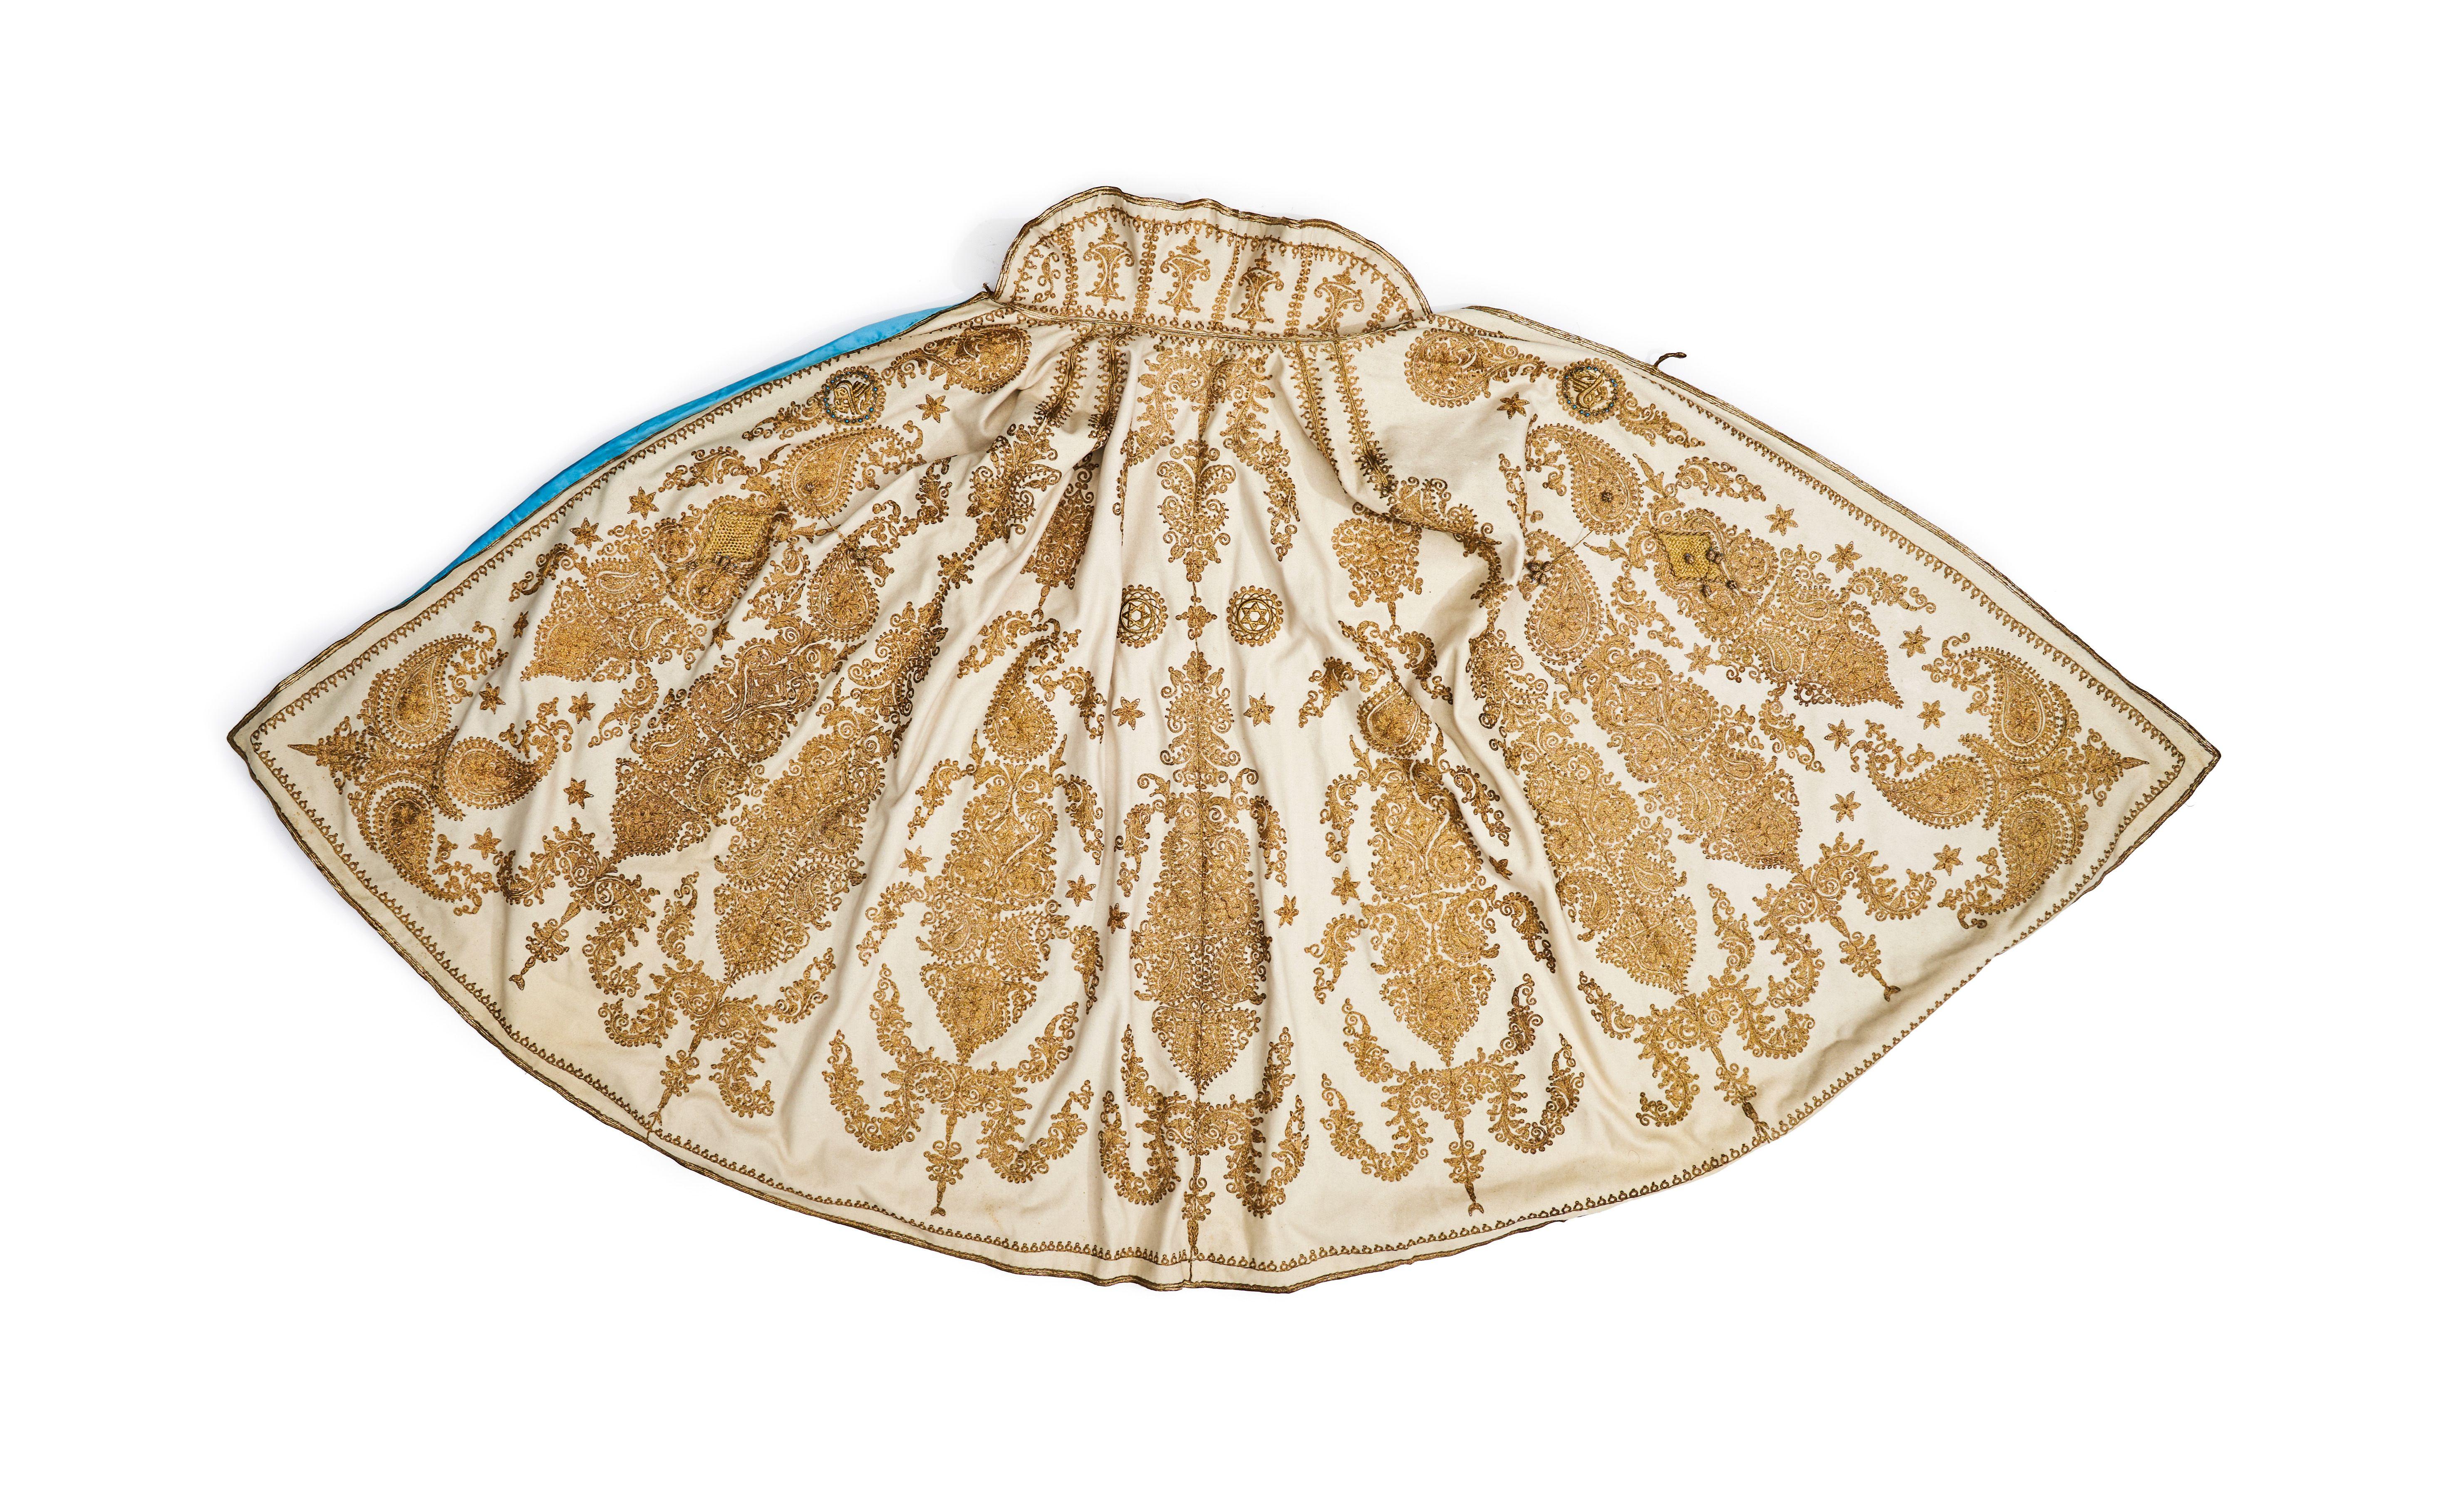 SILK, WOOL AND SILVER GILT MOROCCAN EMBROIDERY CEREMONIAL CAPE - Image 2 of 5